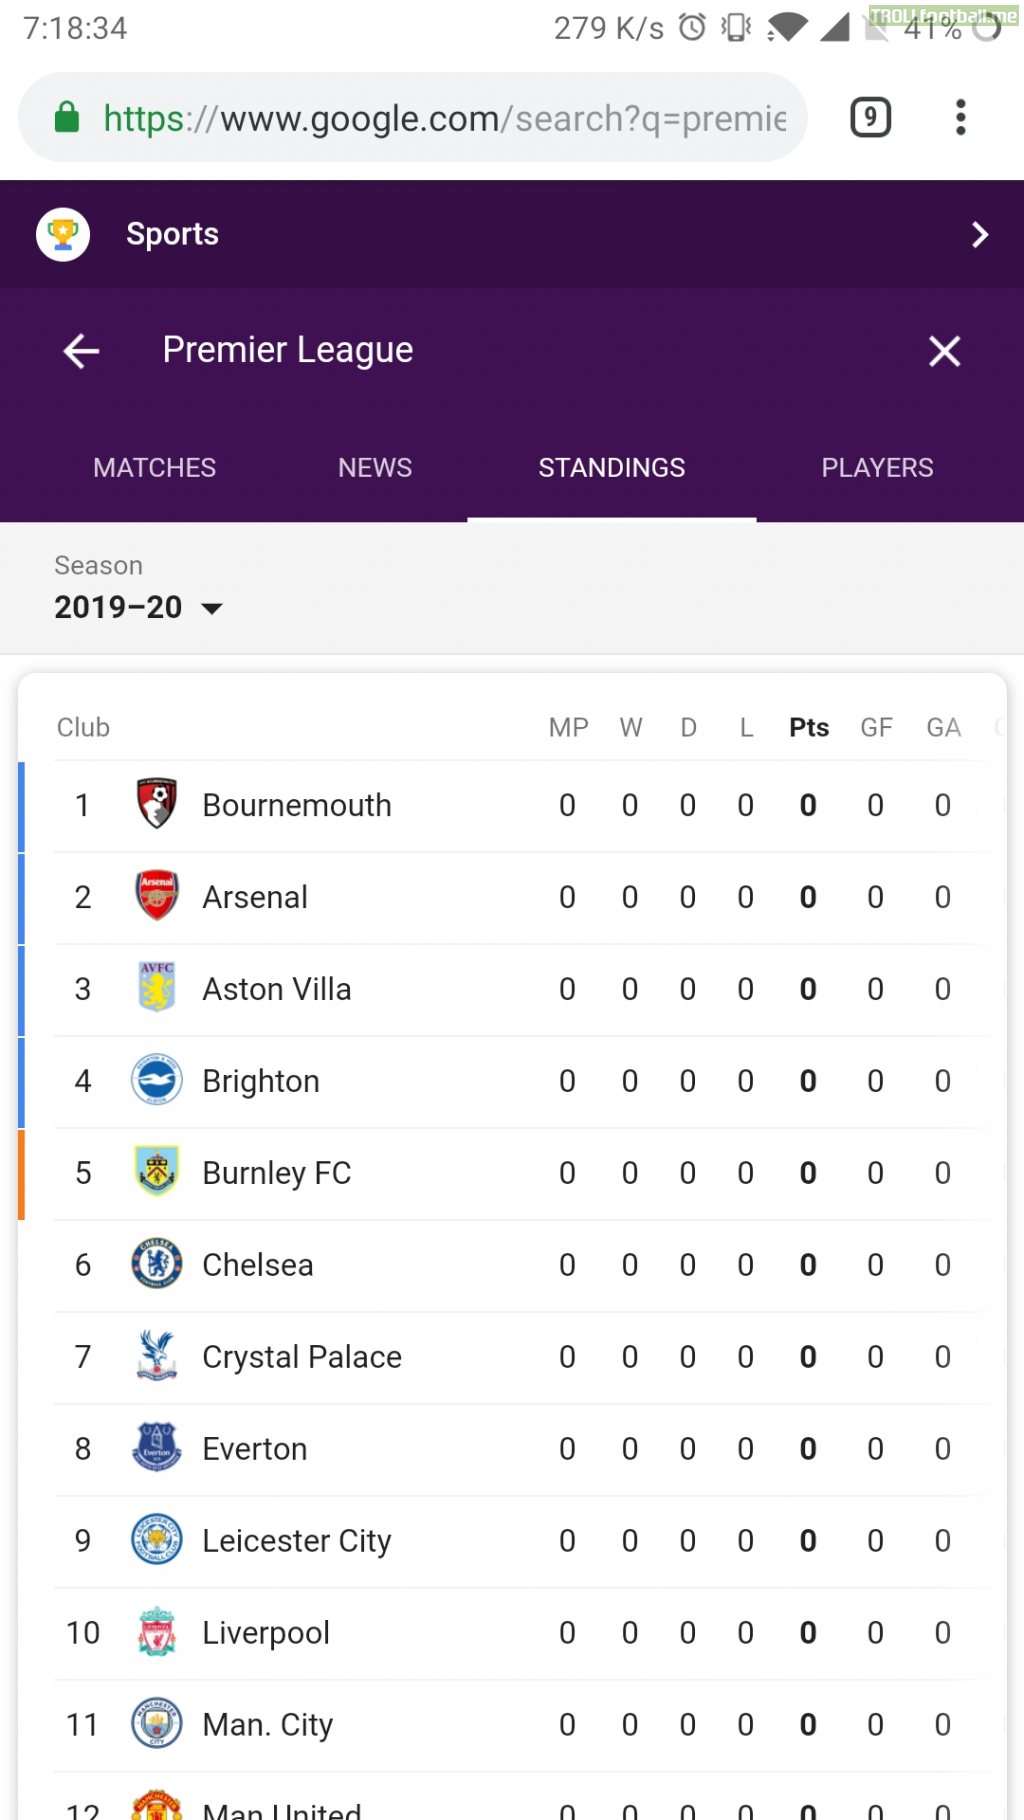 Bournemouth sneaking top of the league in Preseason.